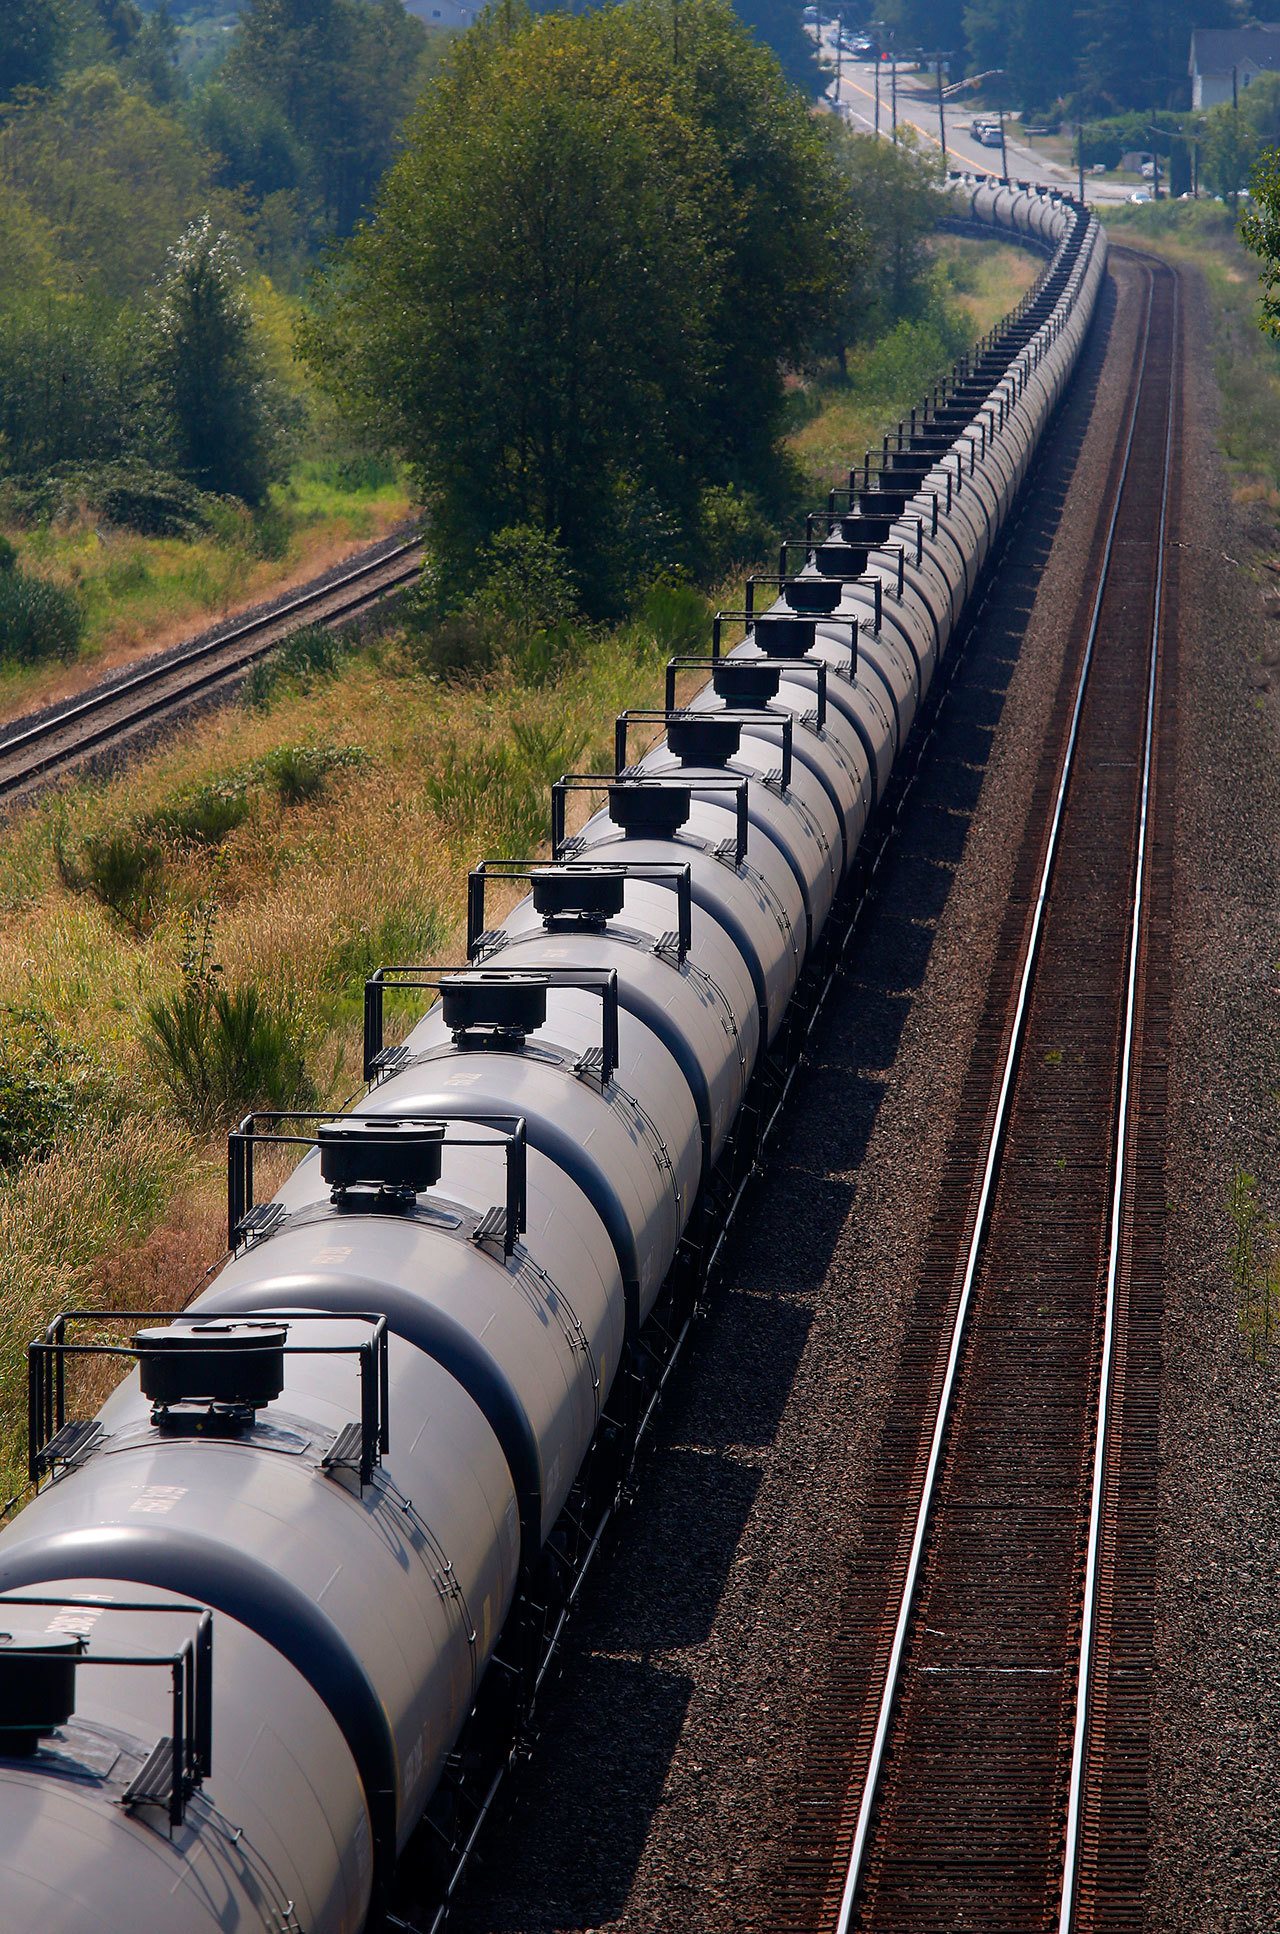 A train comprised of tank cars, each with the placard 1267 denoting that the tank carries crude oil, waits on the tracks going through Lowell in Everett in August 2014. (Mark Mulligan / Herald file photo)